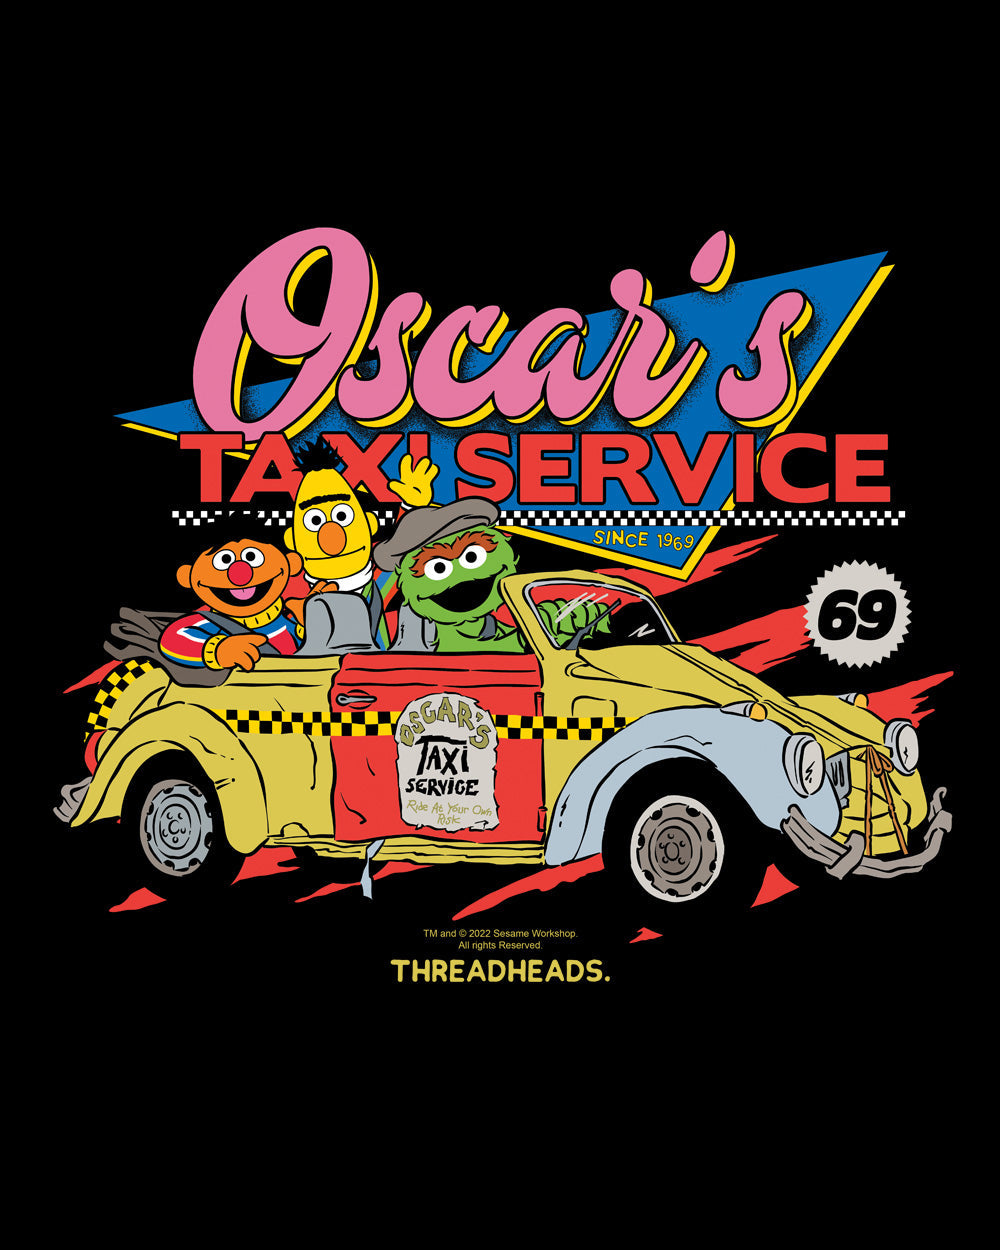 Sesame Street Oscar's Taxi Service Classic Retro Vintage Educational Puppet TV Program Officially Licensed T-Shirt